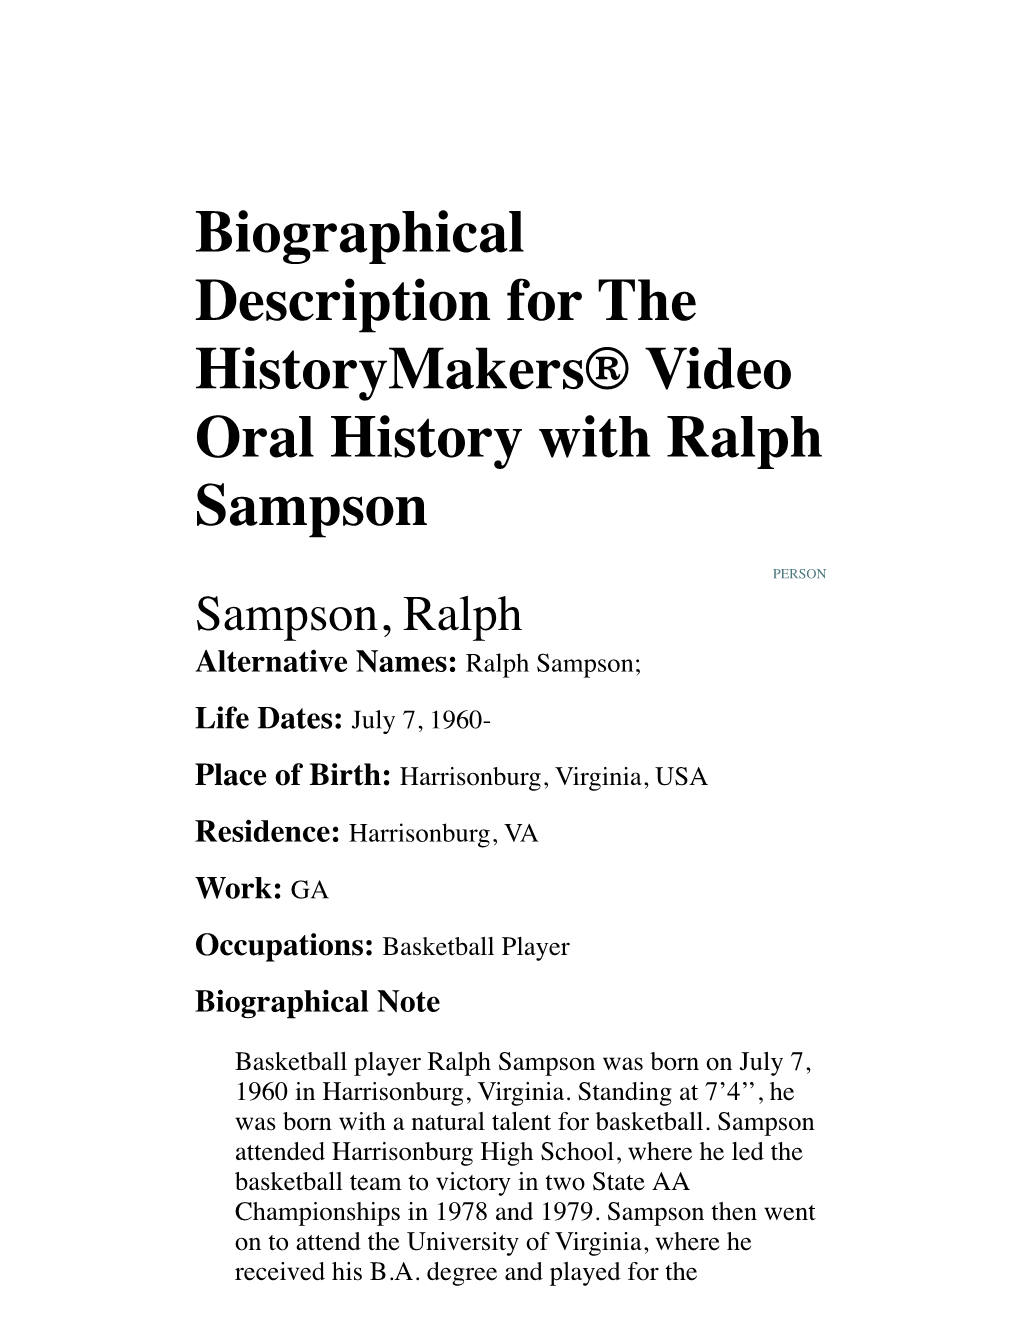 Biographical Description for the Historymakers® Video Oral History with Ralph Sampson